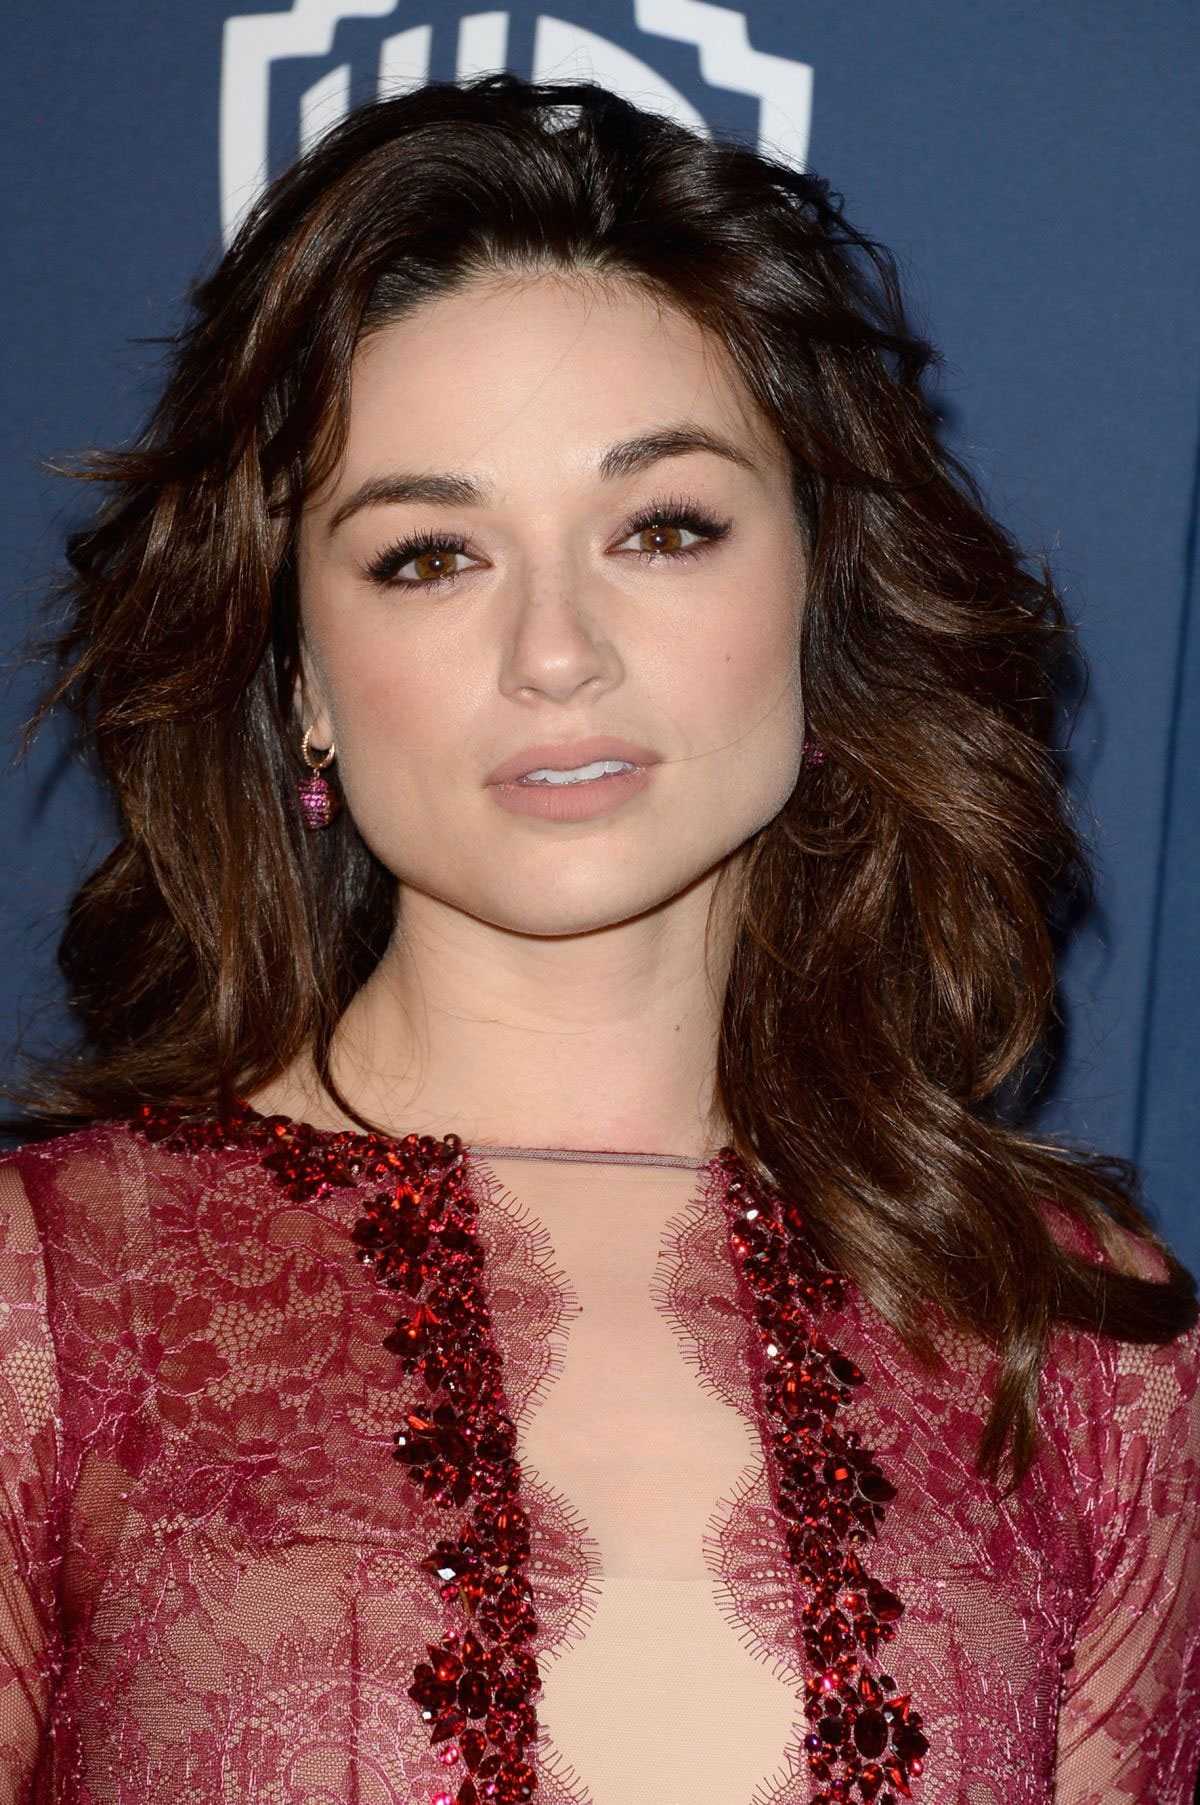 70+ Hot Pictures Of Crystal Reed That Are Sure To Make You Her Biggest Fan 5